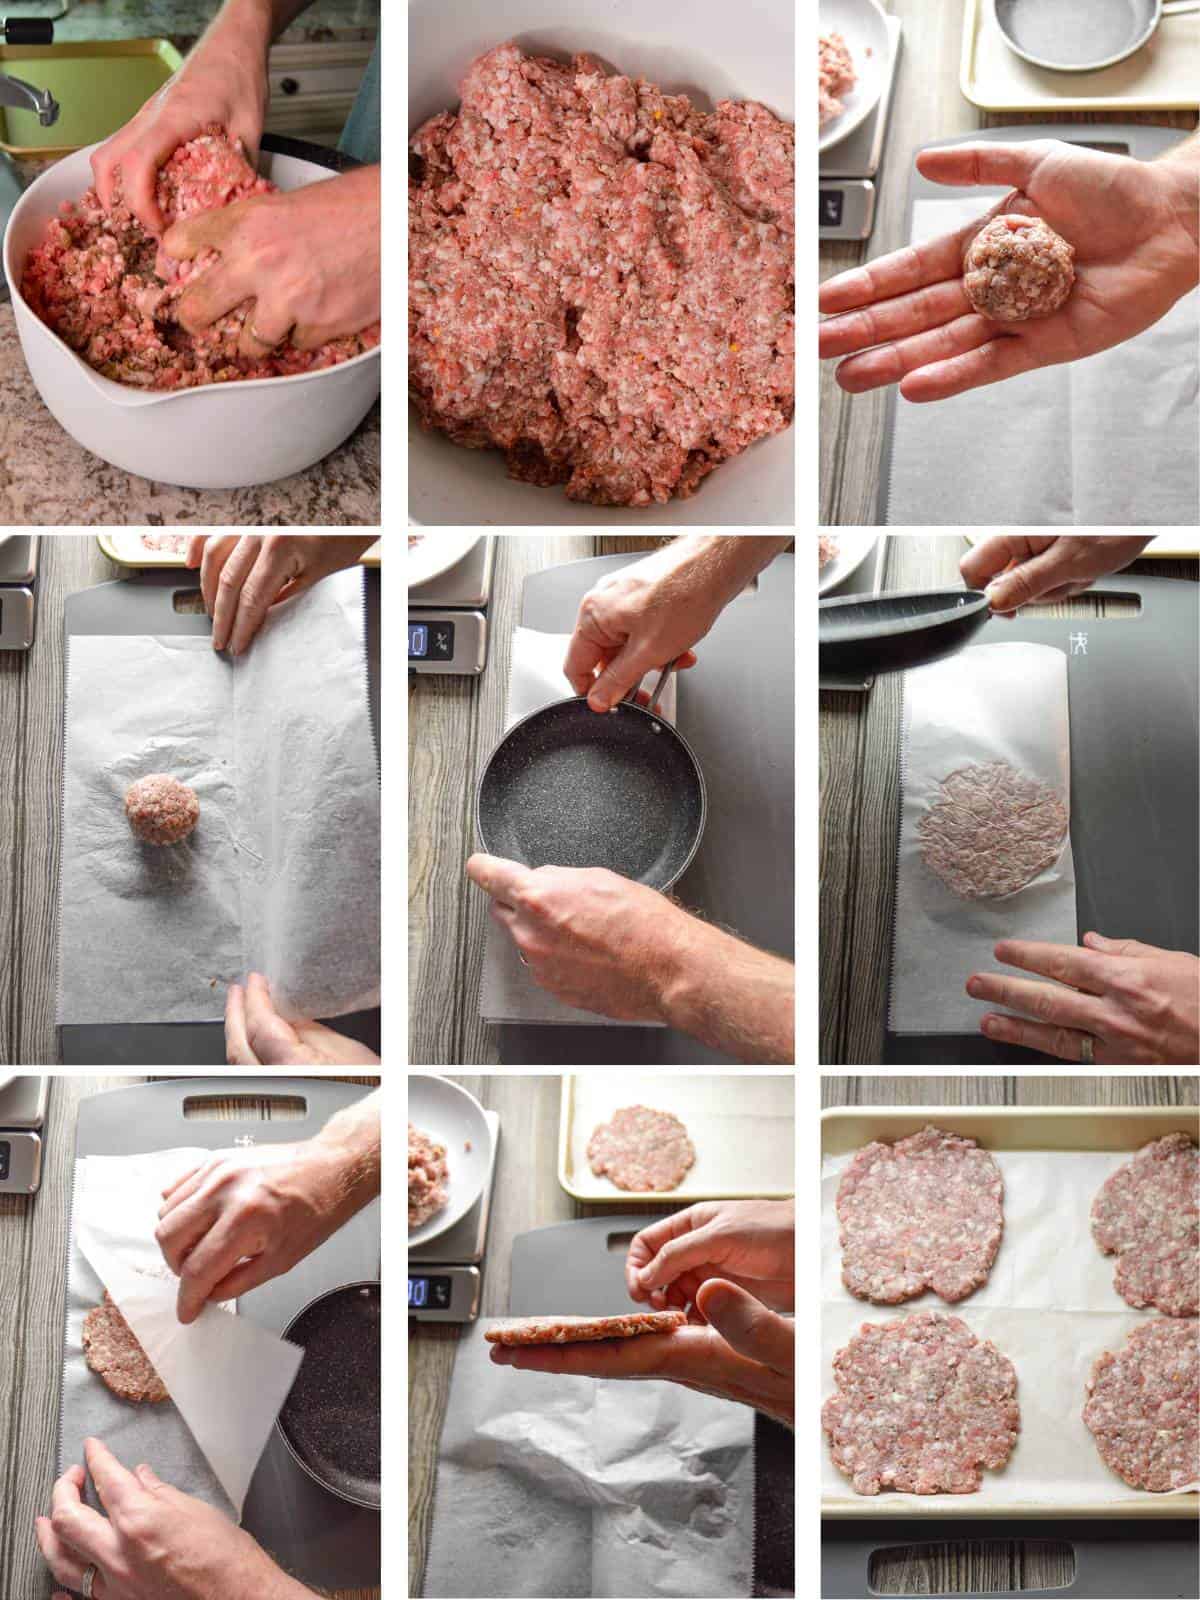 Steps shown to make patties for breakfast sausage out of ground pork